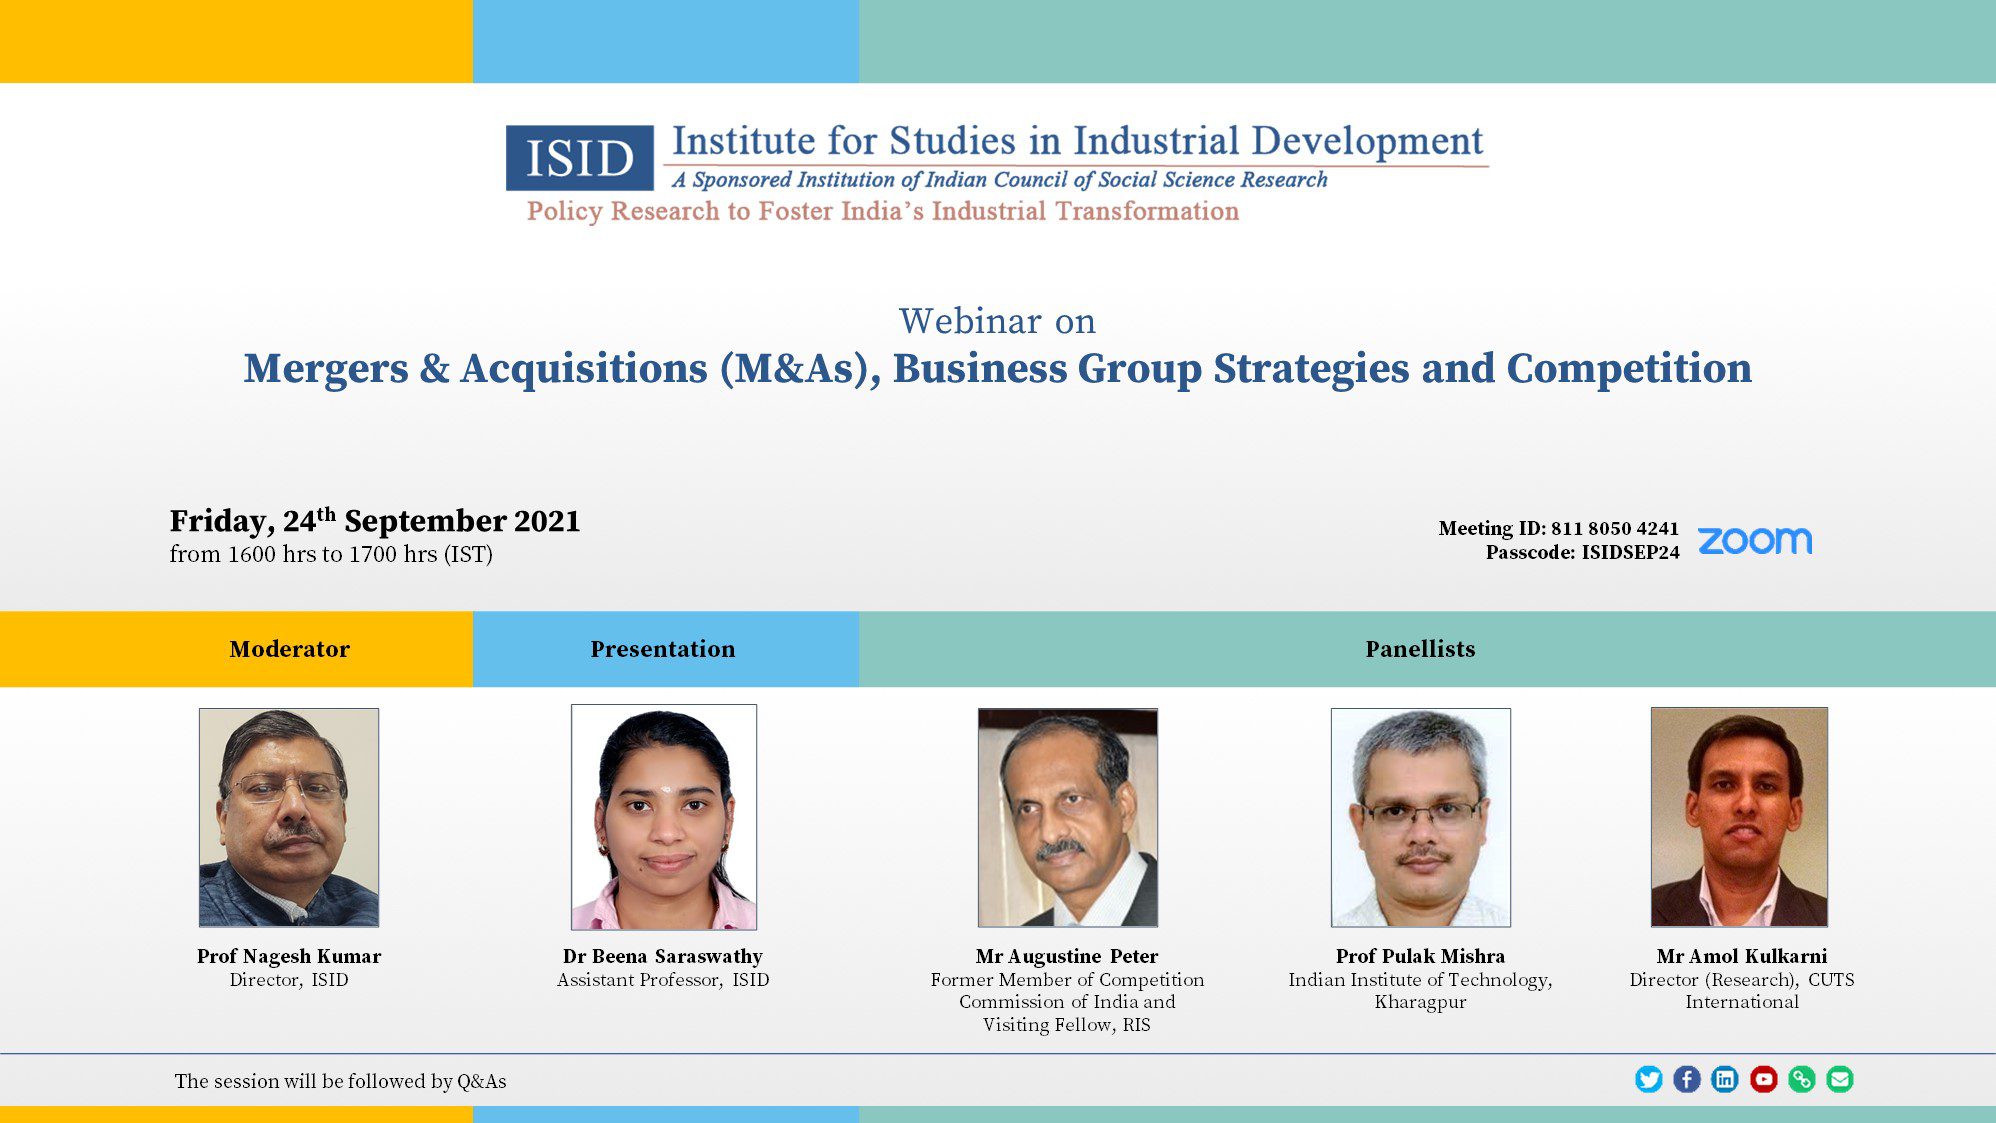 ISID Webinar on Mergers & Acquisitions (M&As), Business Group Strategies and Competition, September 24, 2021